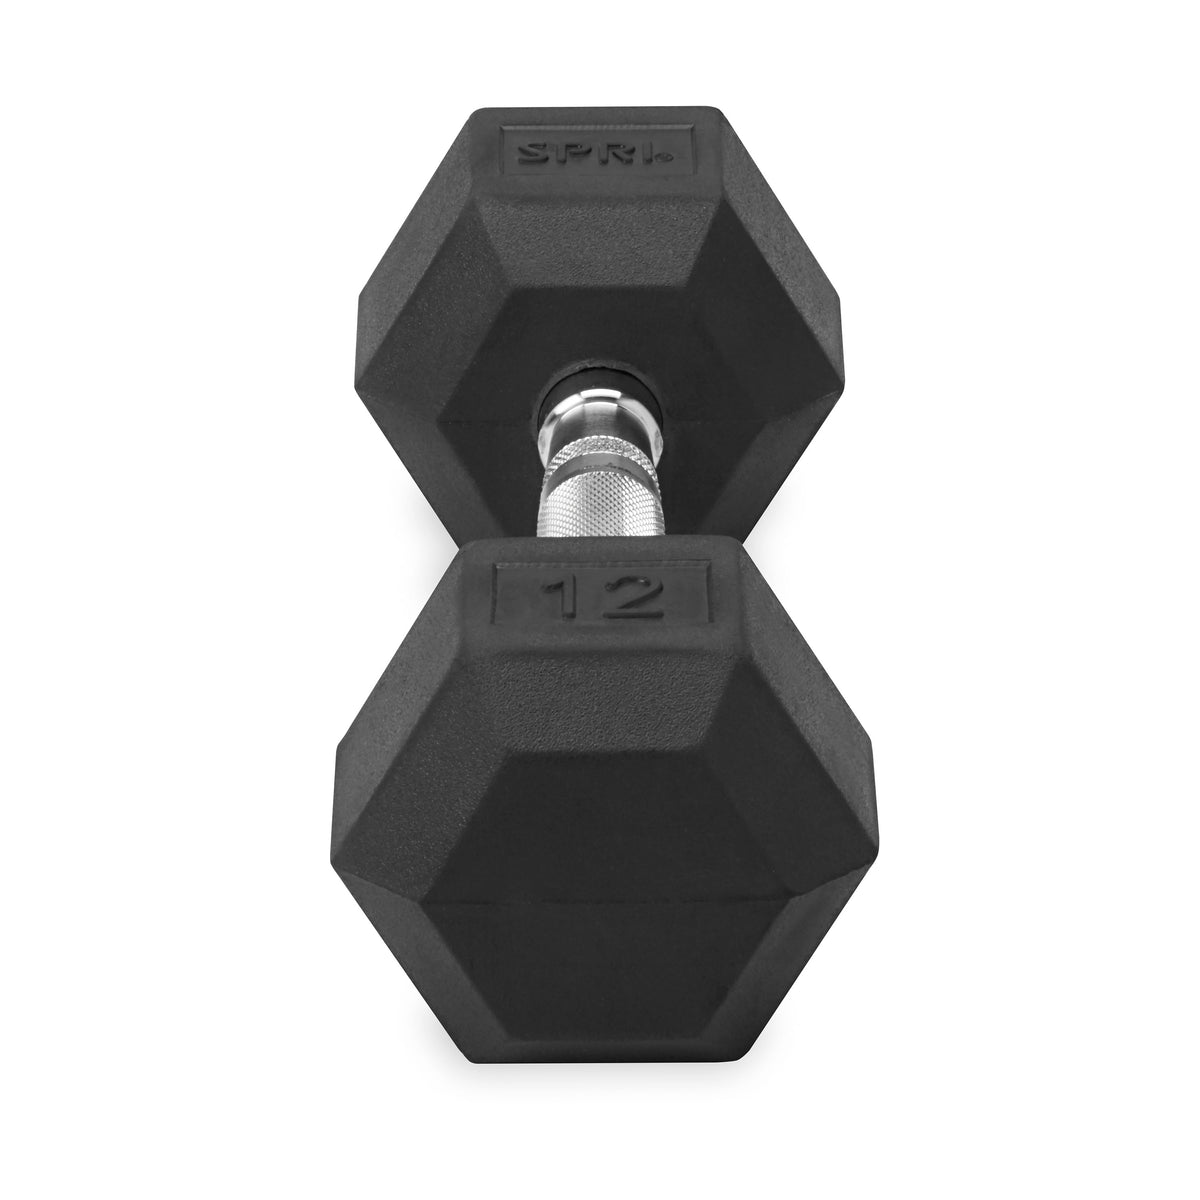 6-sided hex weights 12lbs angled view